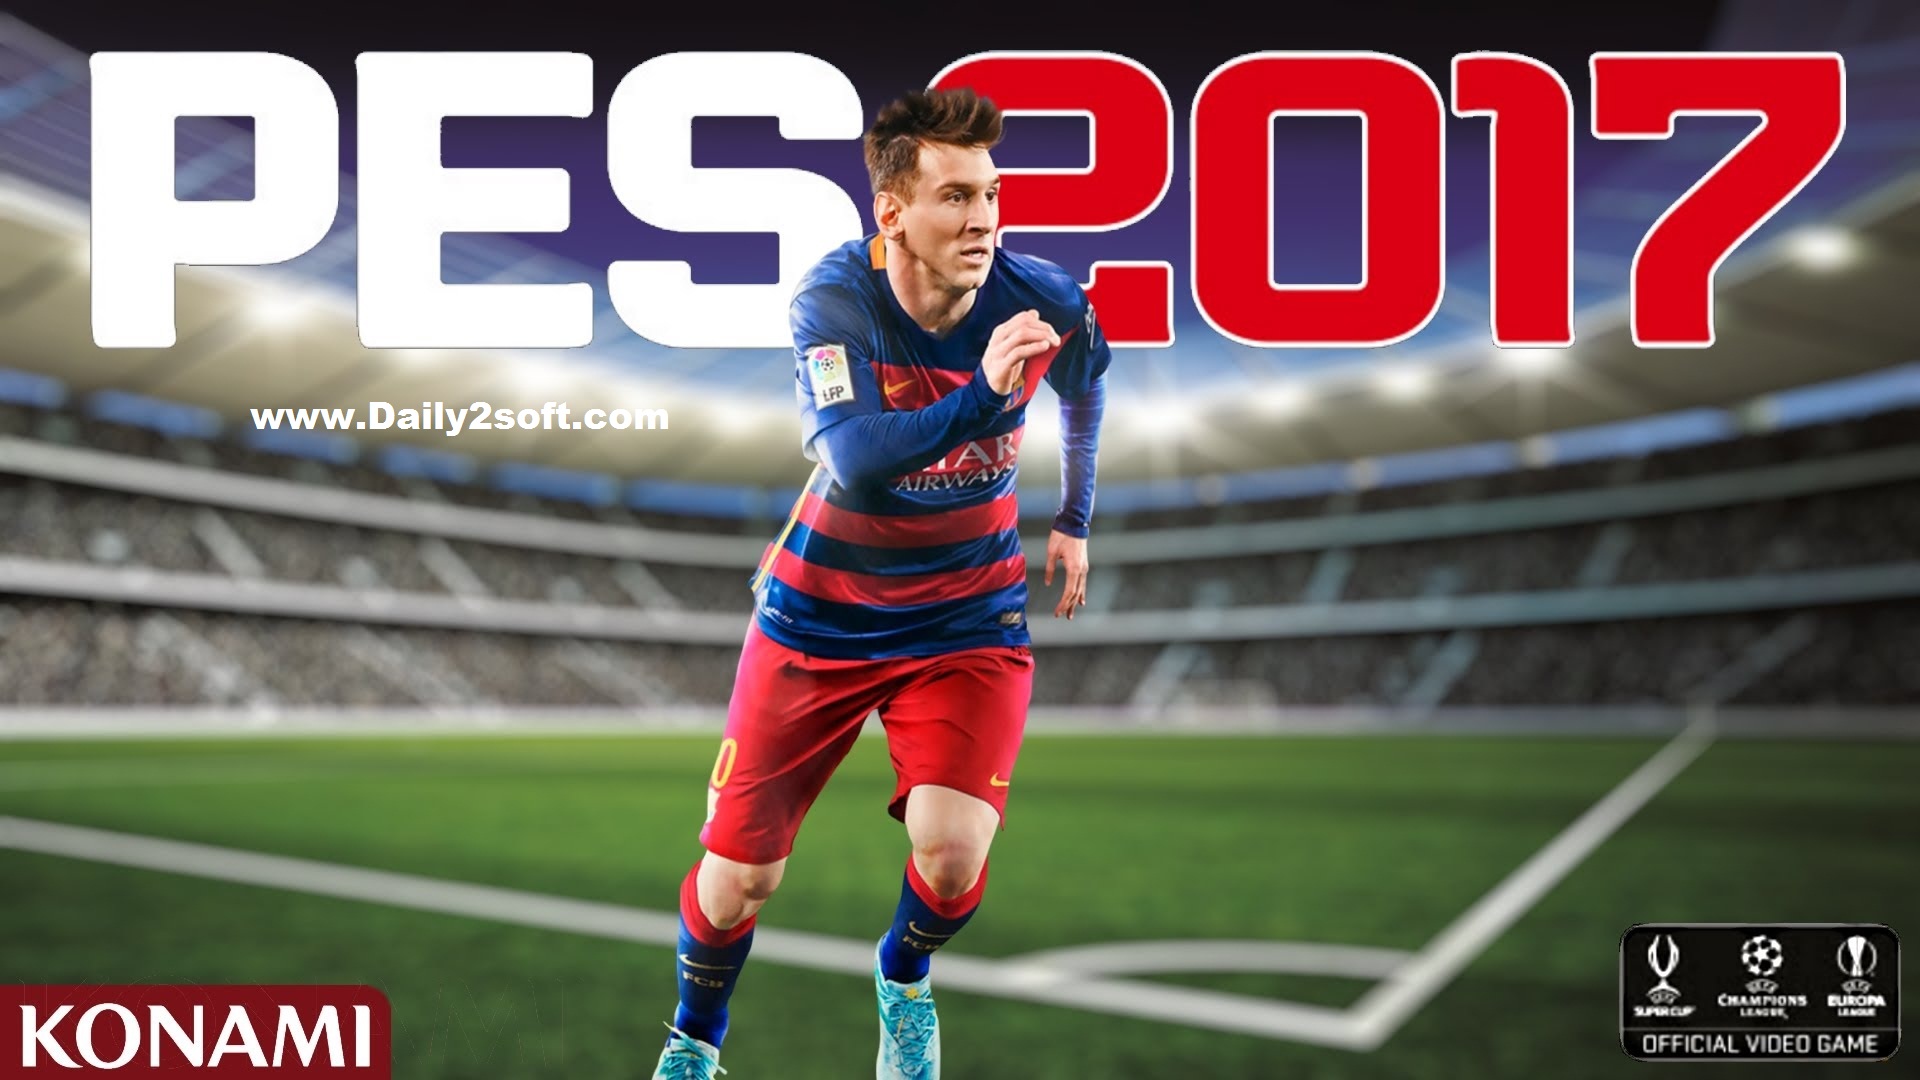 PES 2017 Full Version Download For PC-Daily2soft